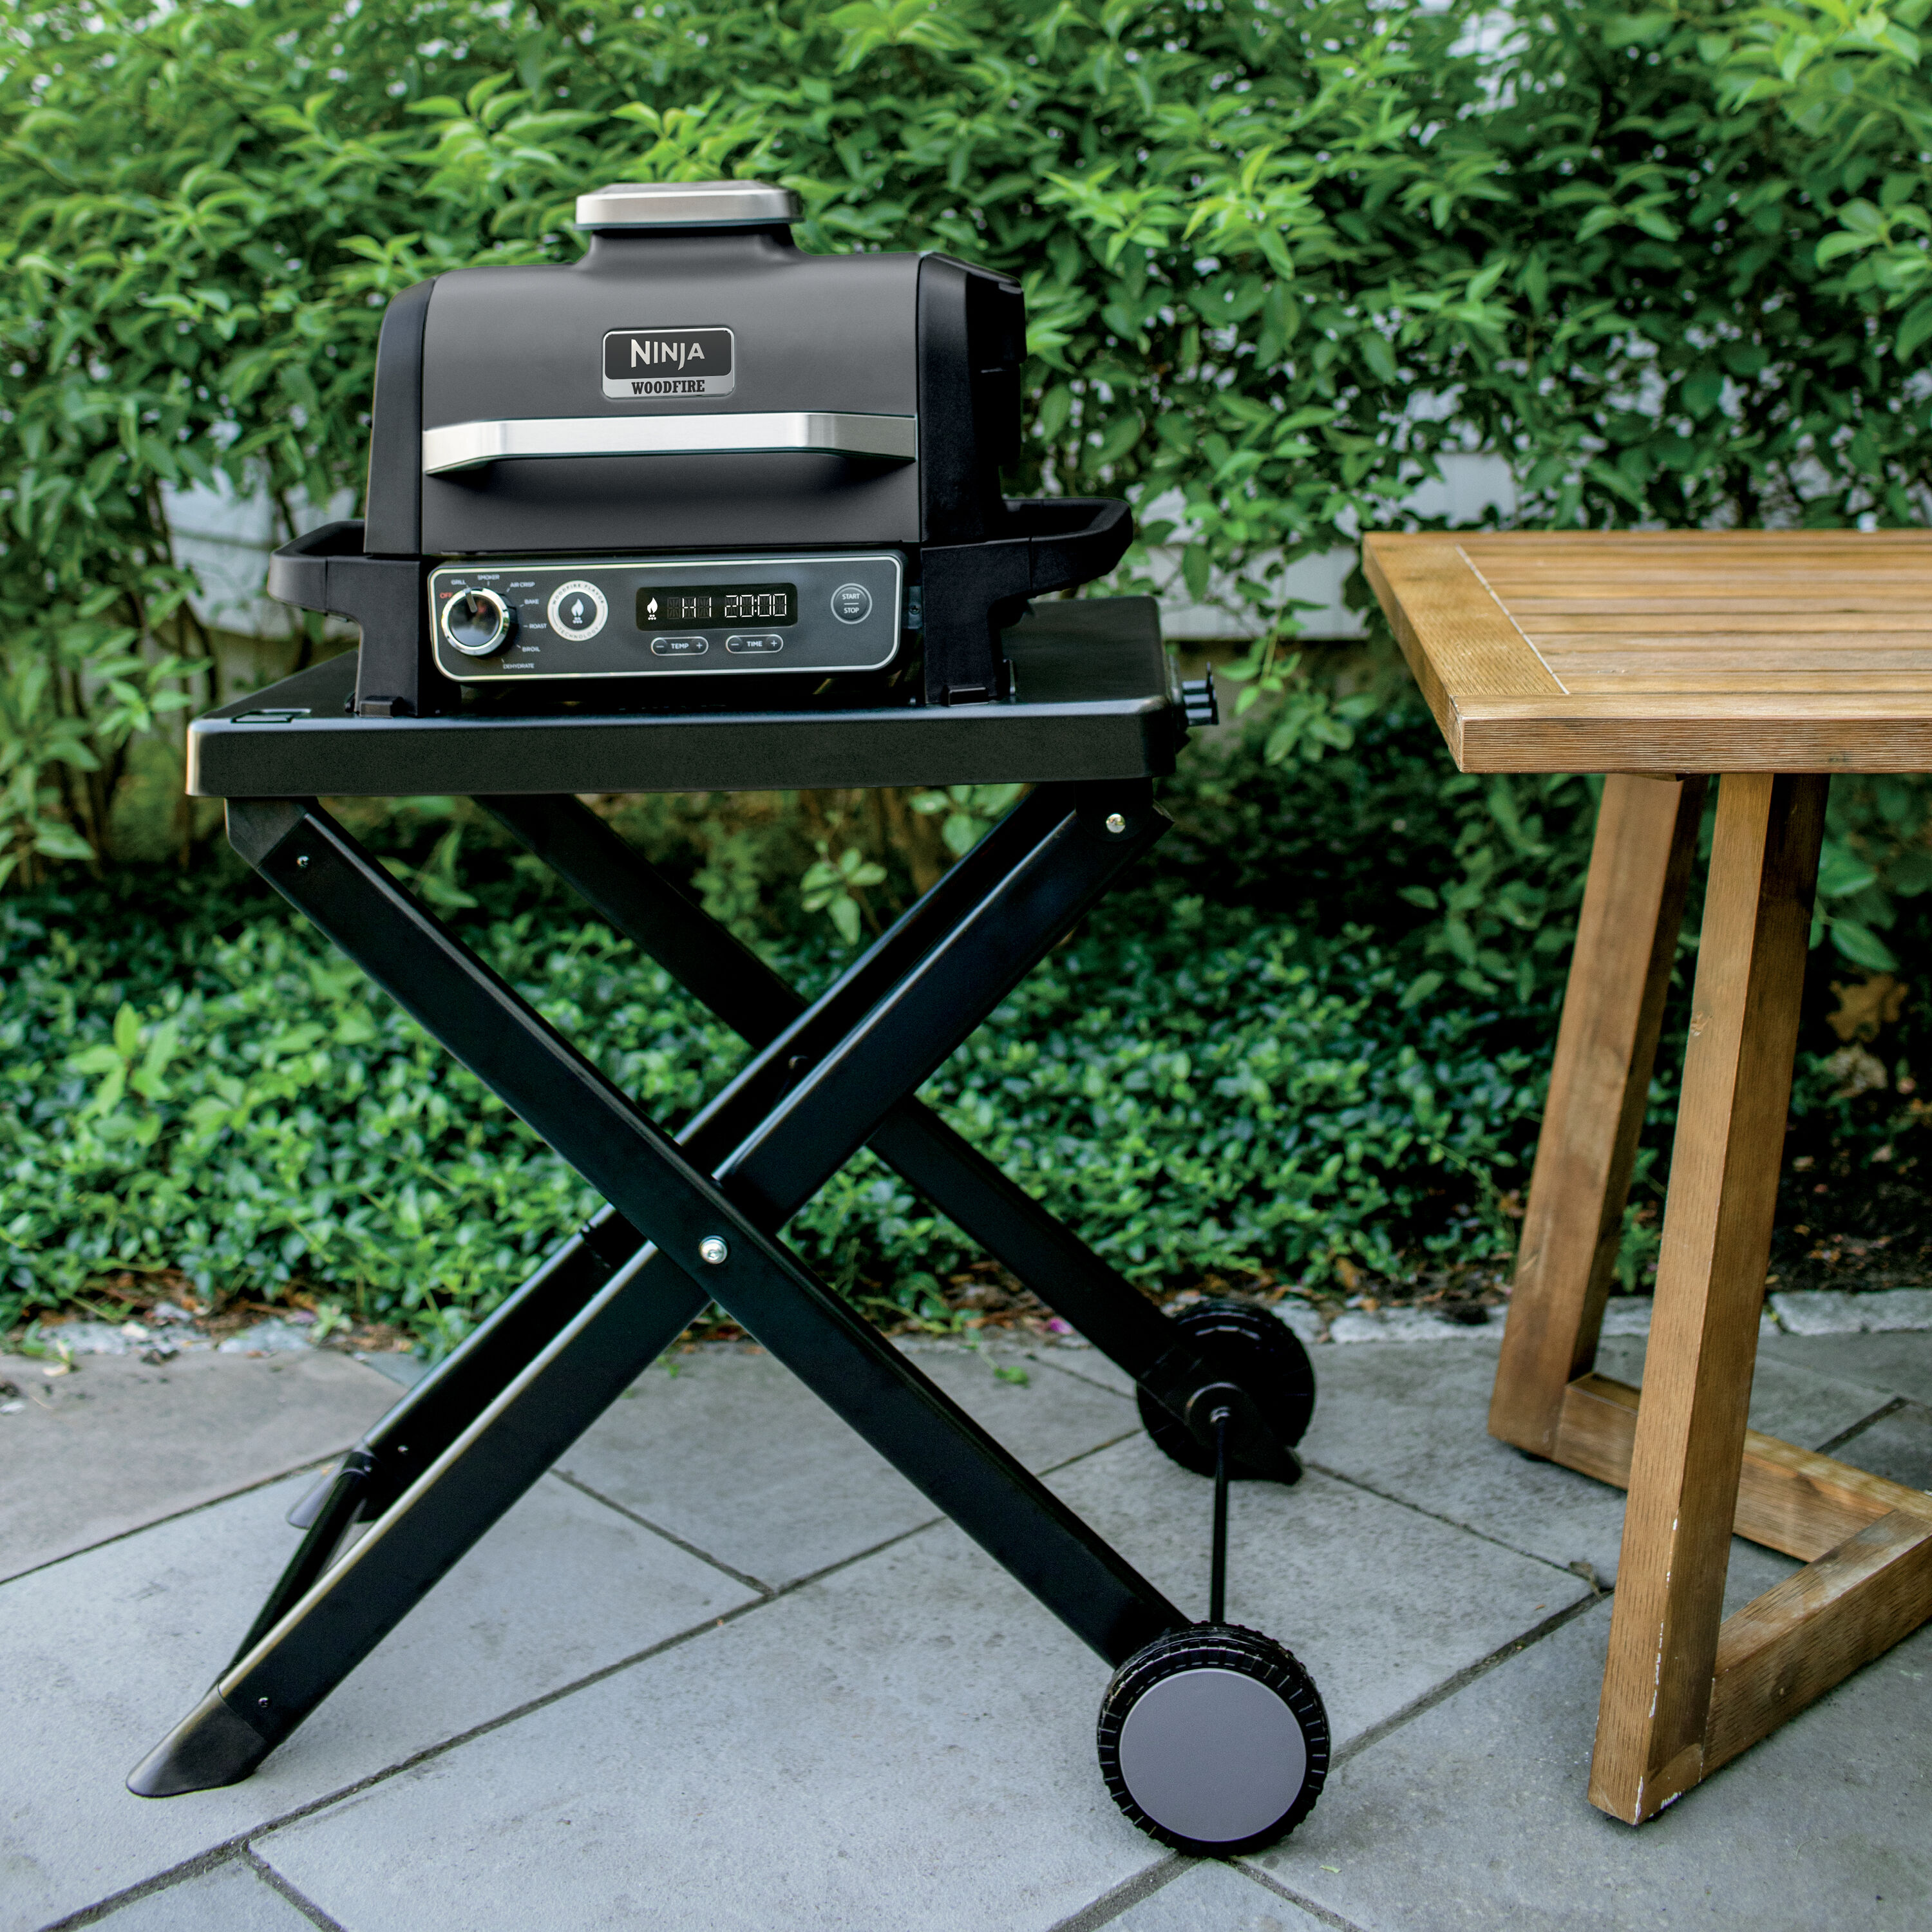 Grill Stand Fit for a Woodworker - Fine Woodworking